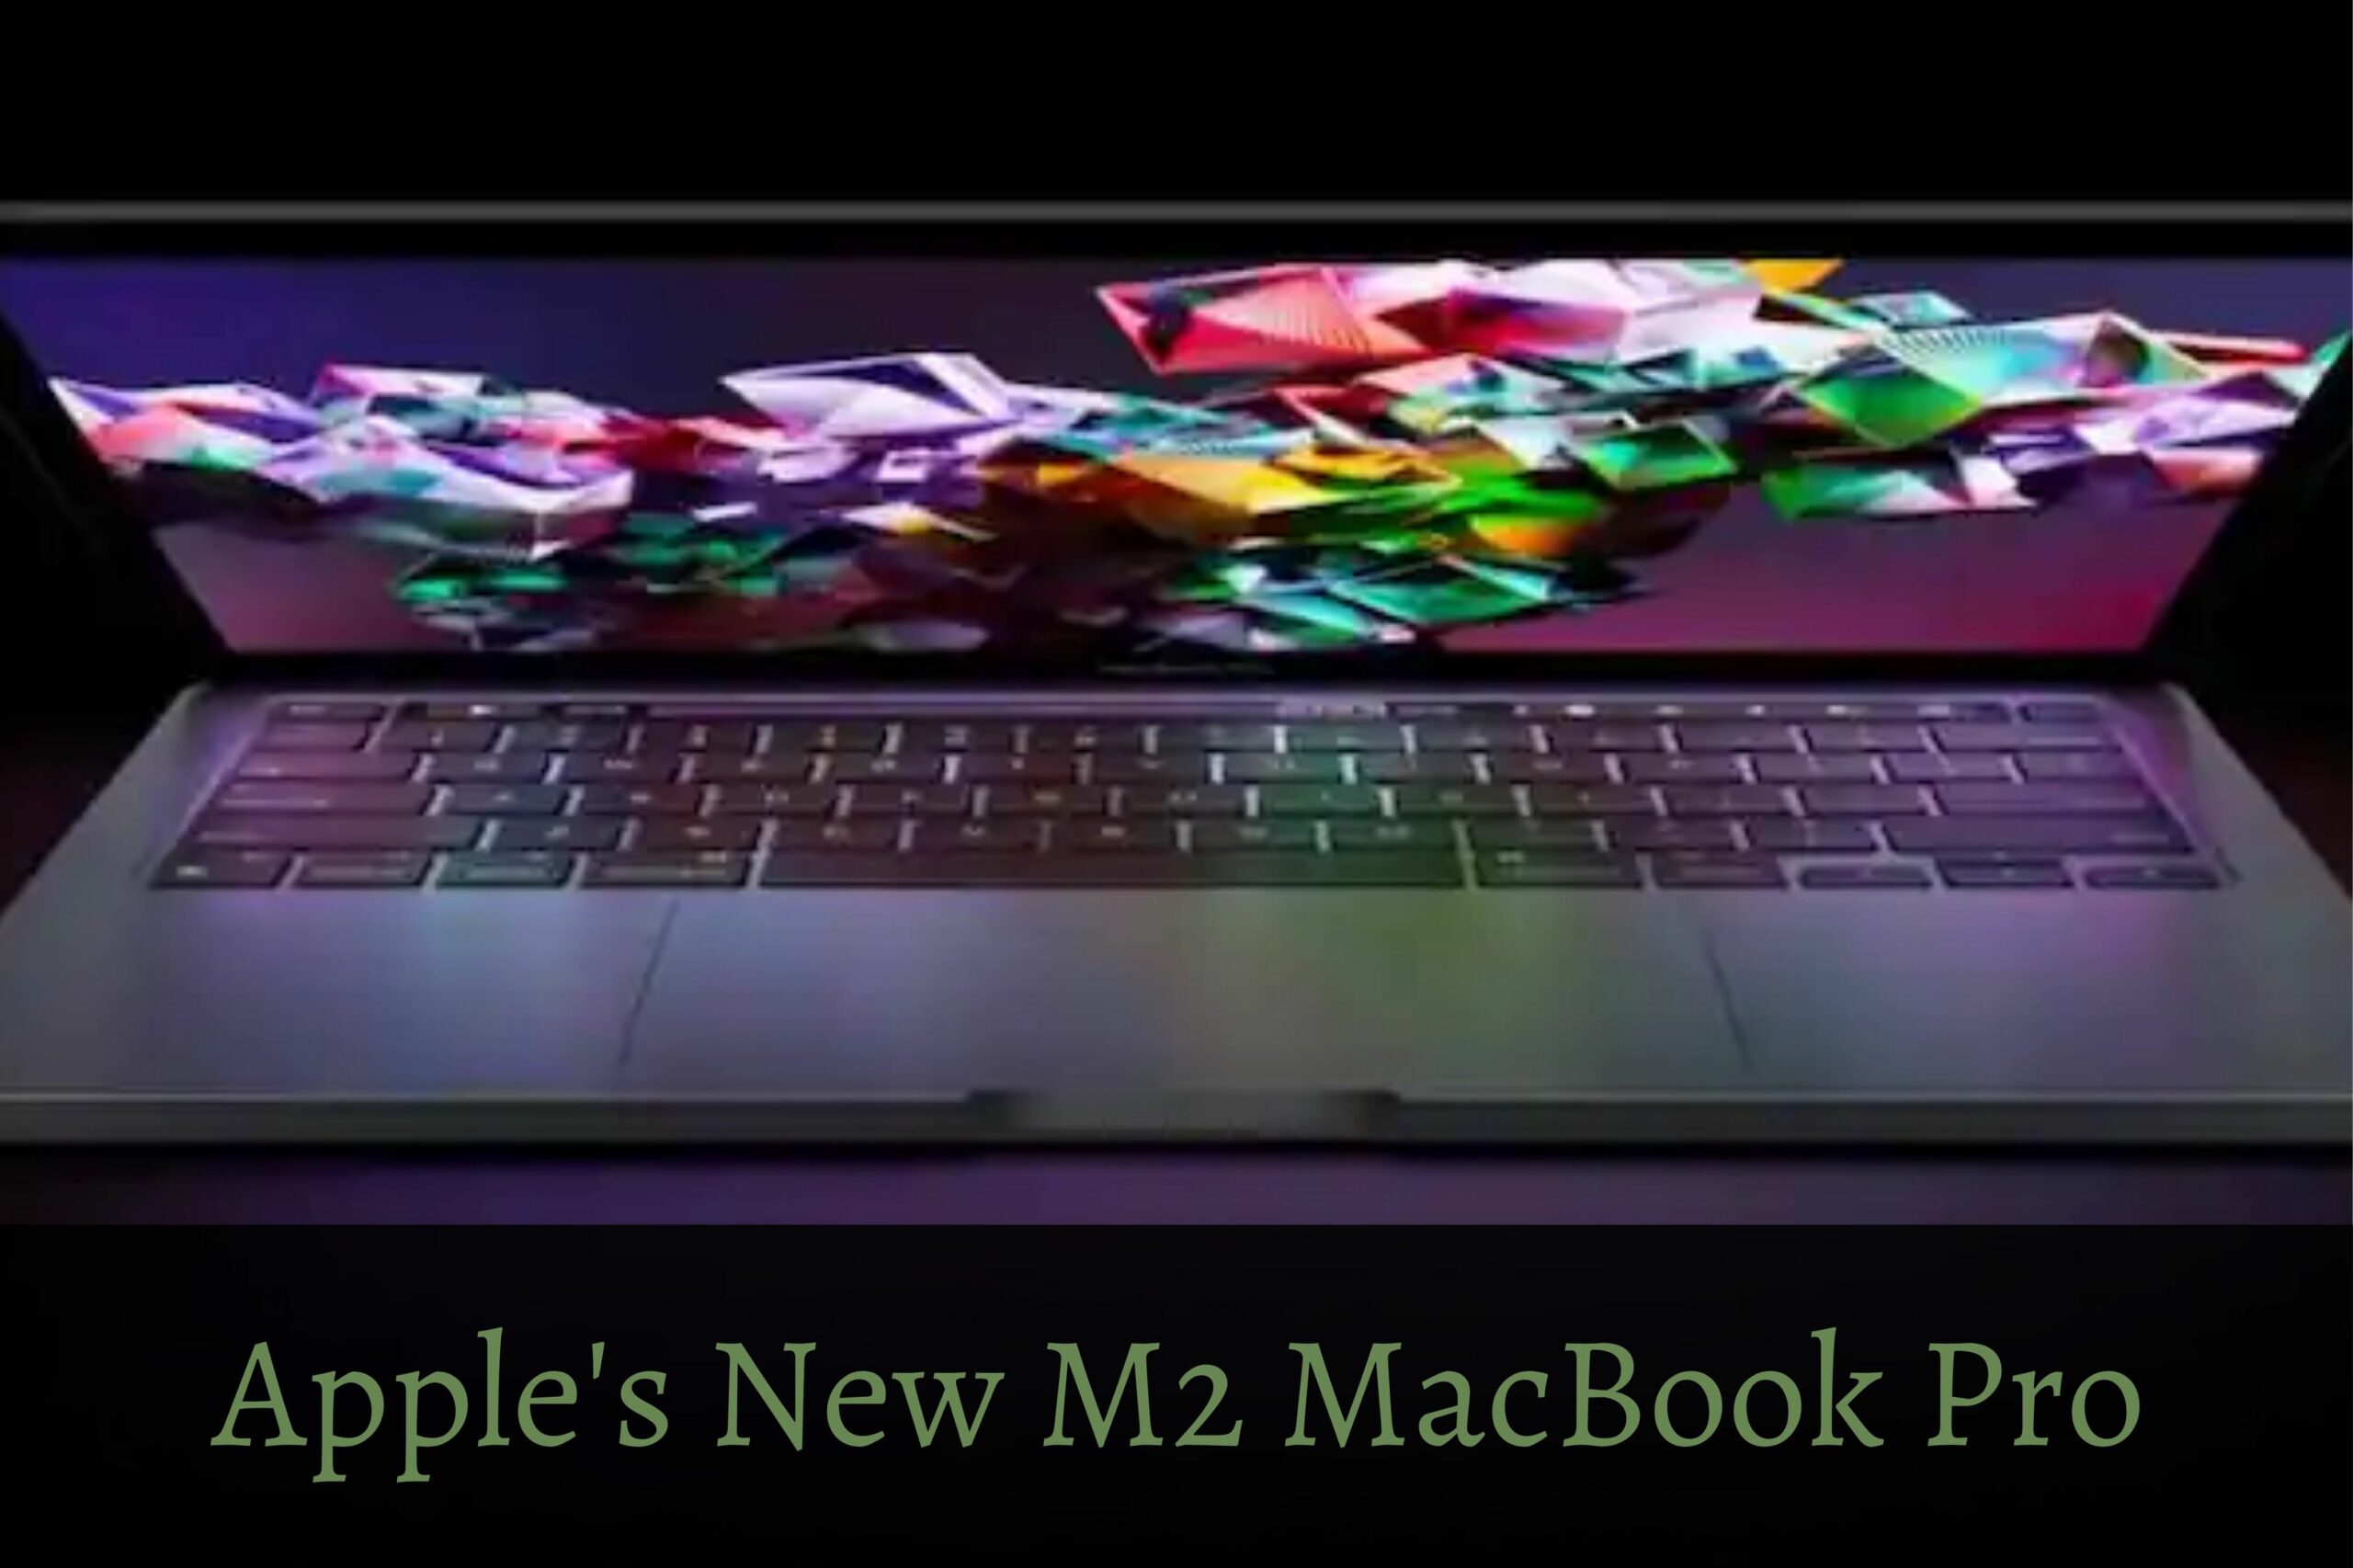 Apple's New M2 MacBook Pro Is Now Available For Preorder!